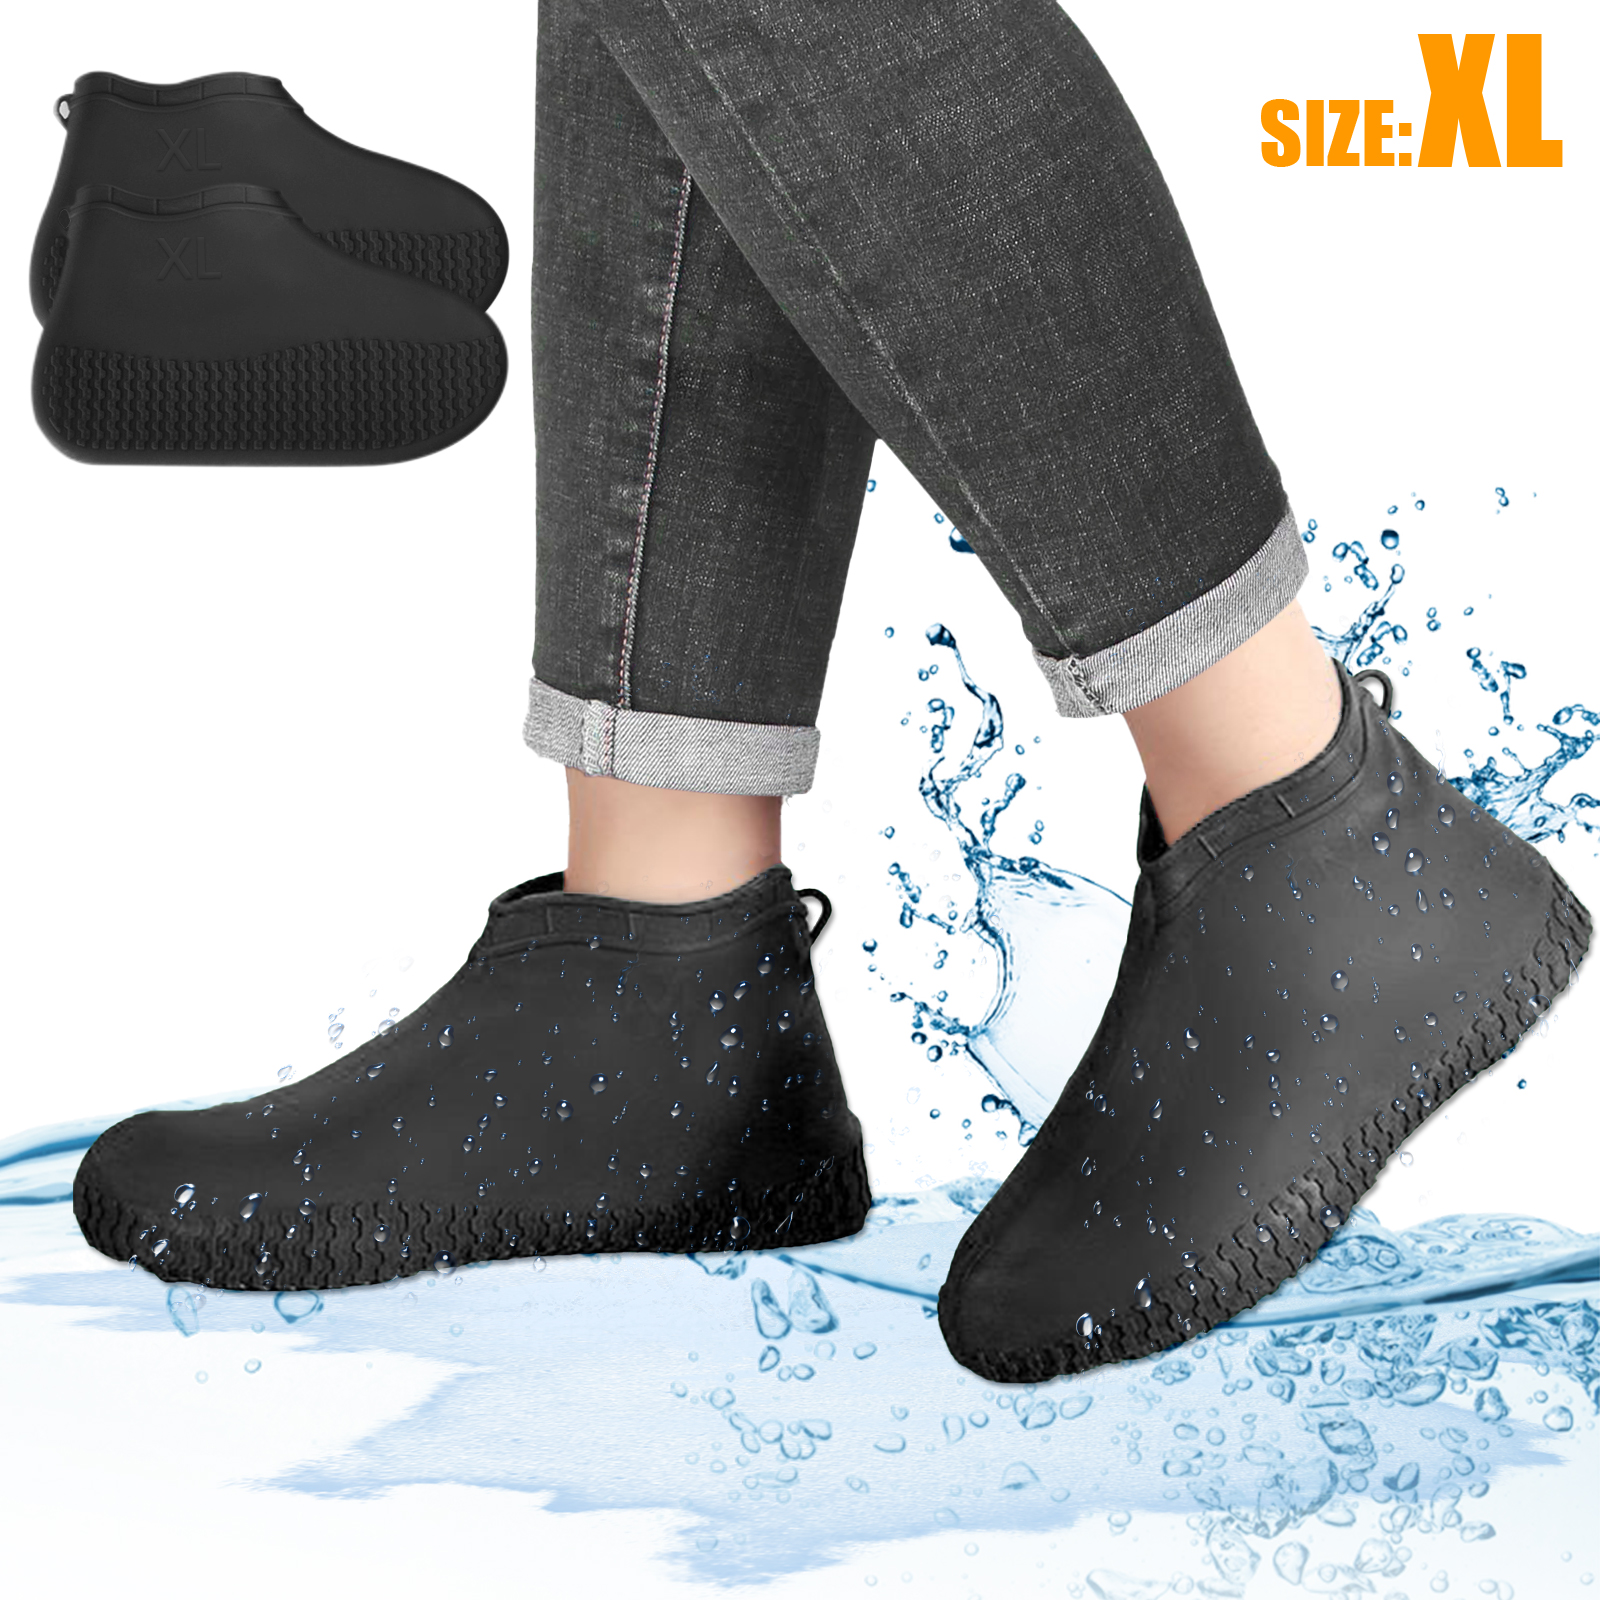 Details about   Outdoor Thicken Overshoes Rain Waterproof Shoe Covers Boot Cover Protector PVC 